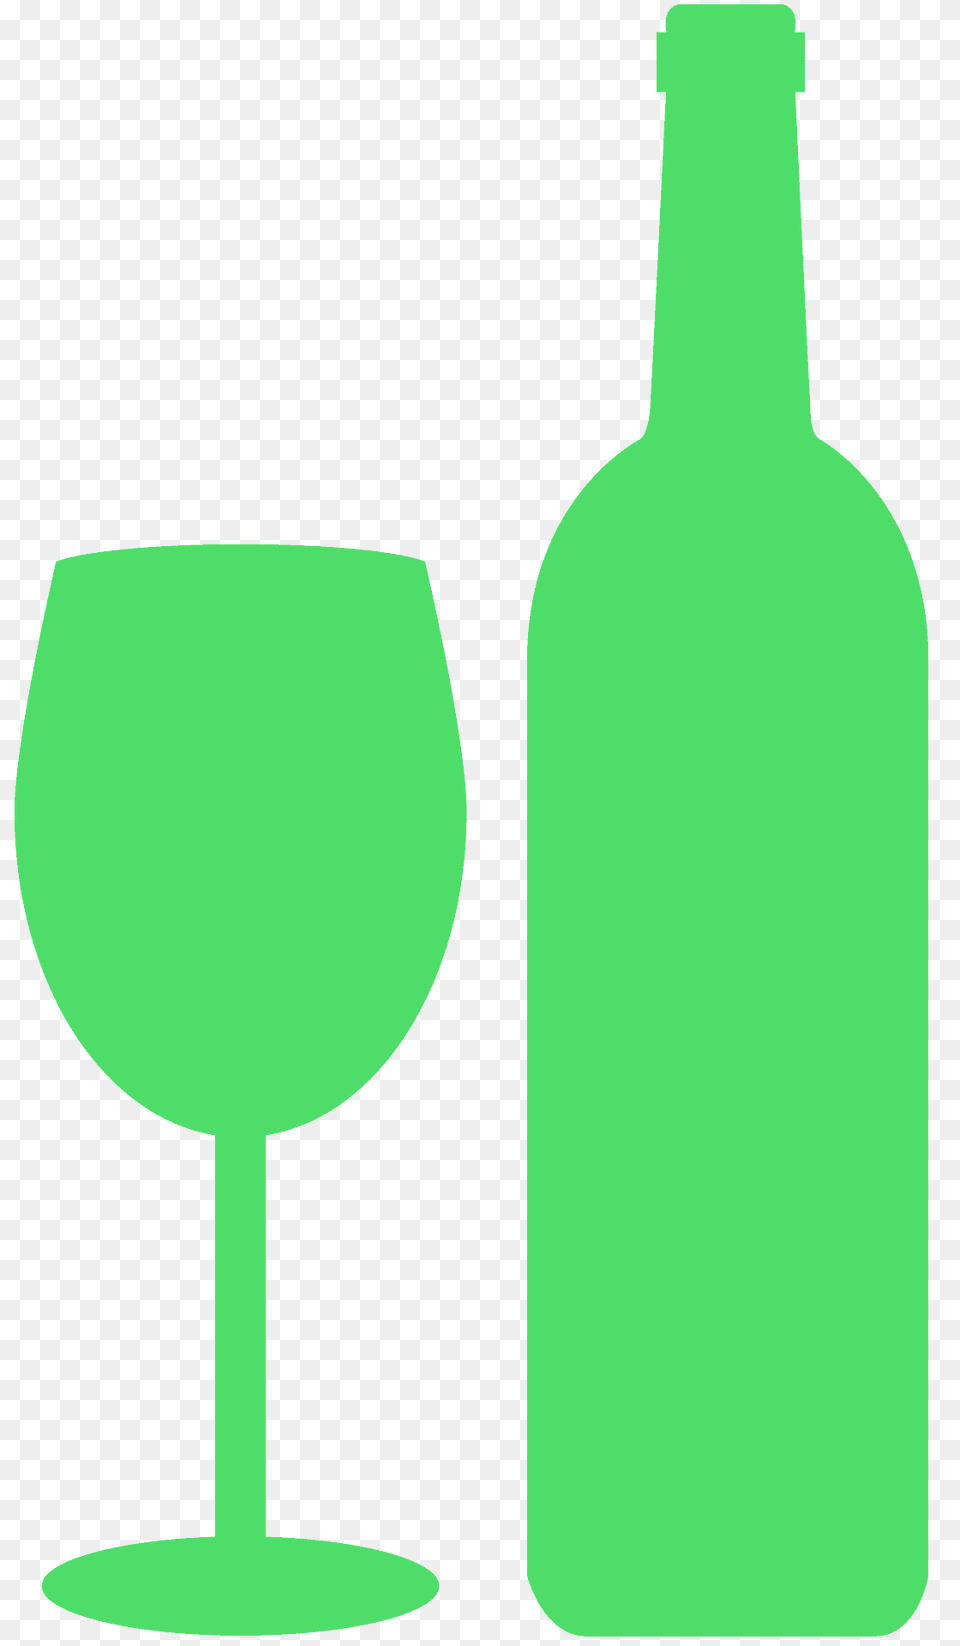 Wine Bottle And Glass Silhouette, Alcohol, Beverage, Liquor, Wine Bottle Png Image